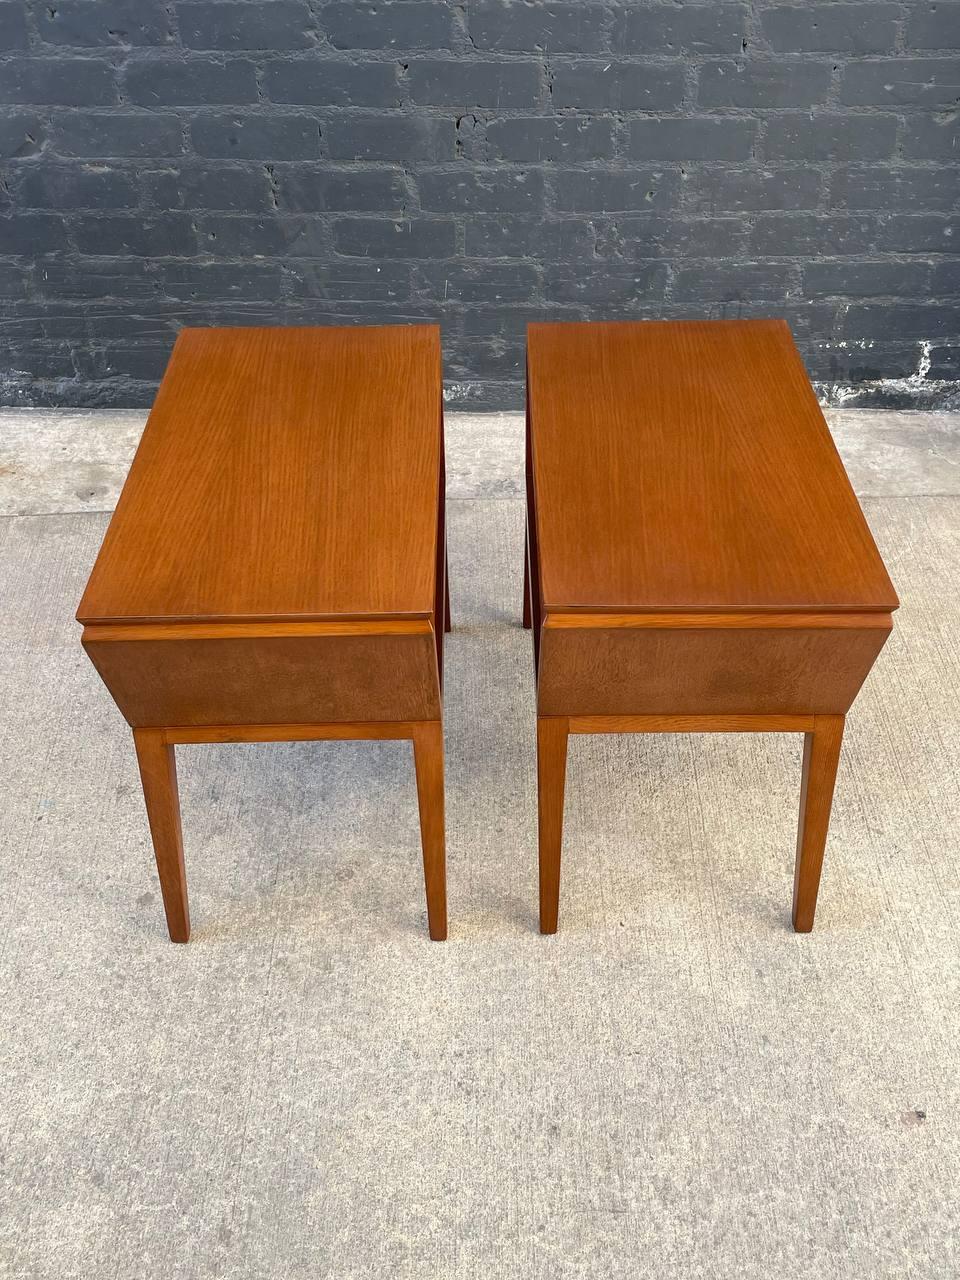 Newly Refinished - Pair of Mid-Century Modern Bookshelf Side Tables For Sale 2